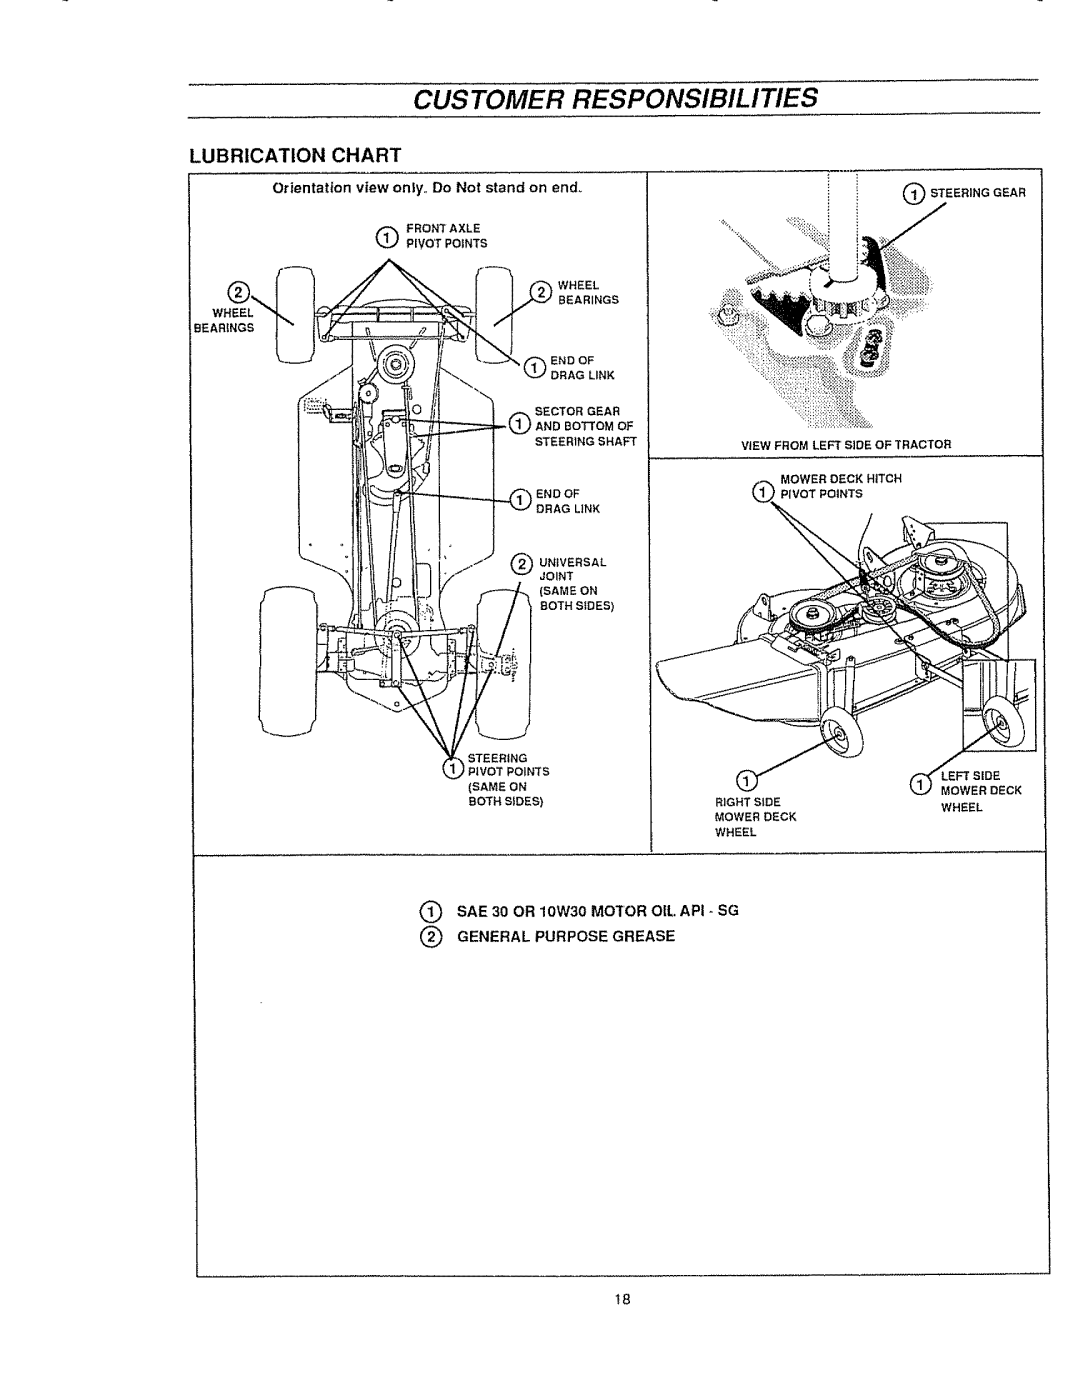 Sears 536.25587 Customer Responsibilities, Lubrication Chart, Orientation view only,, Do Not stand on end_, O Steeringgear 